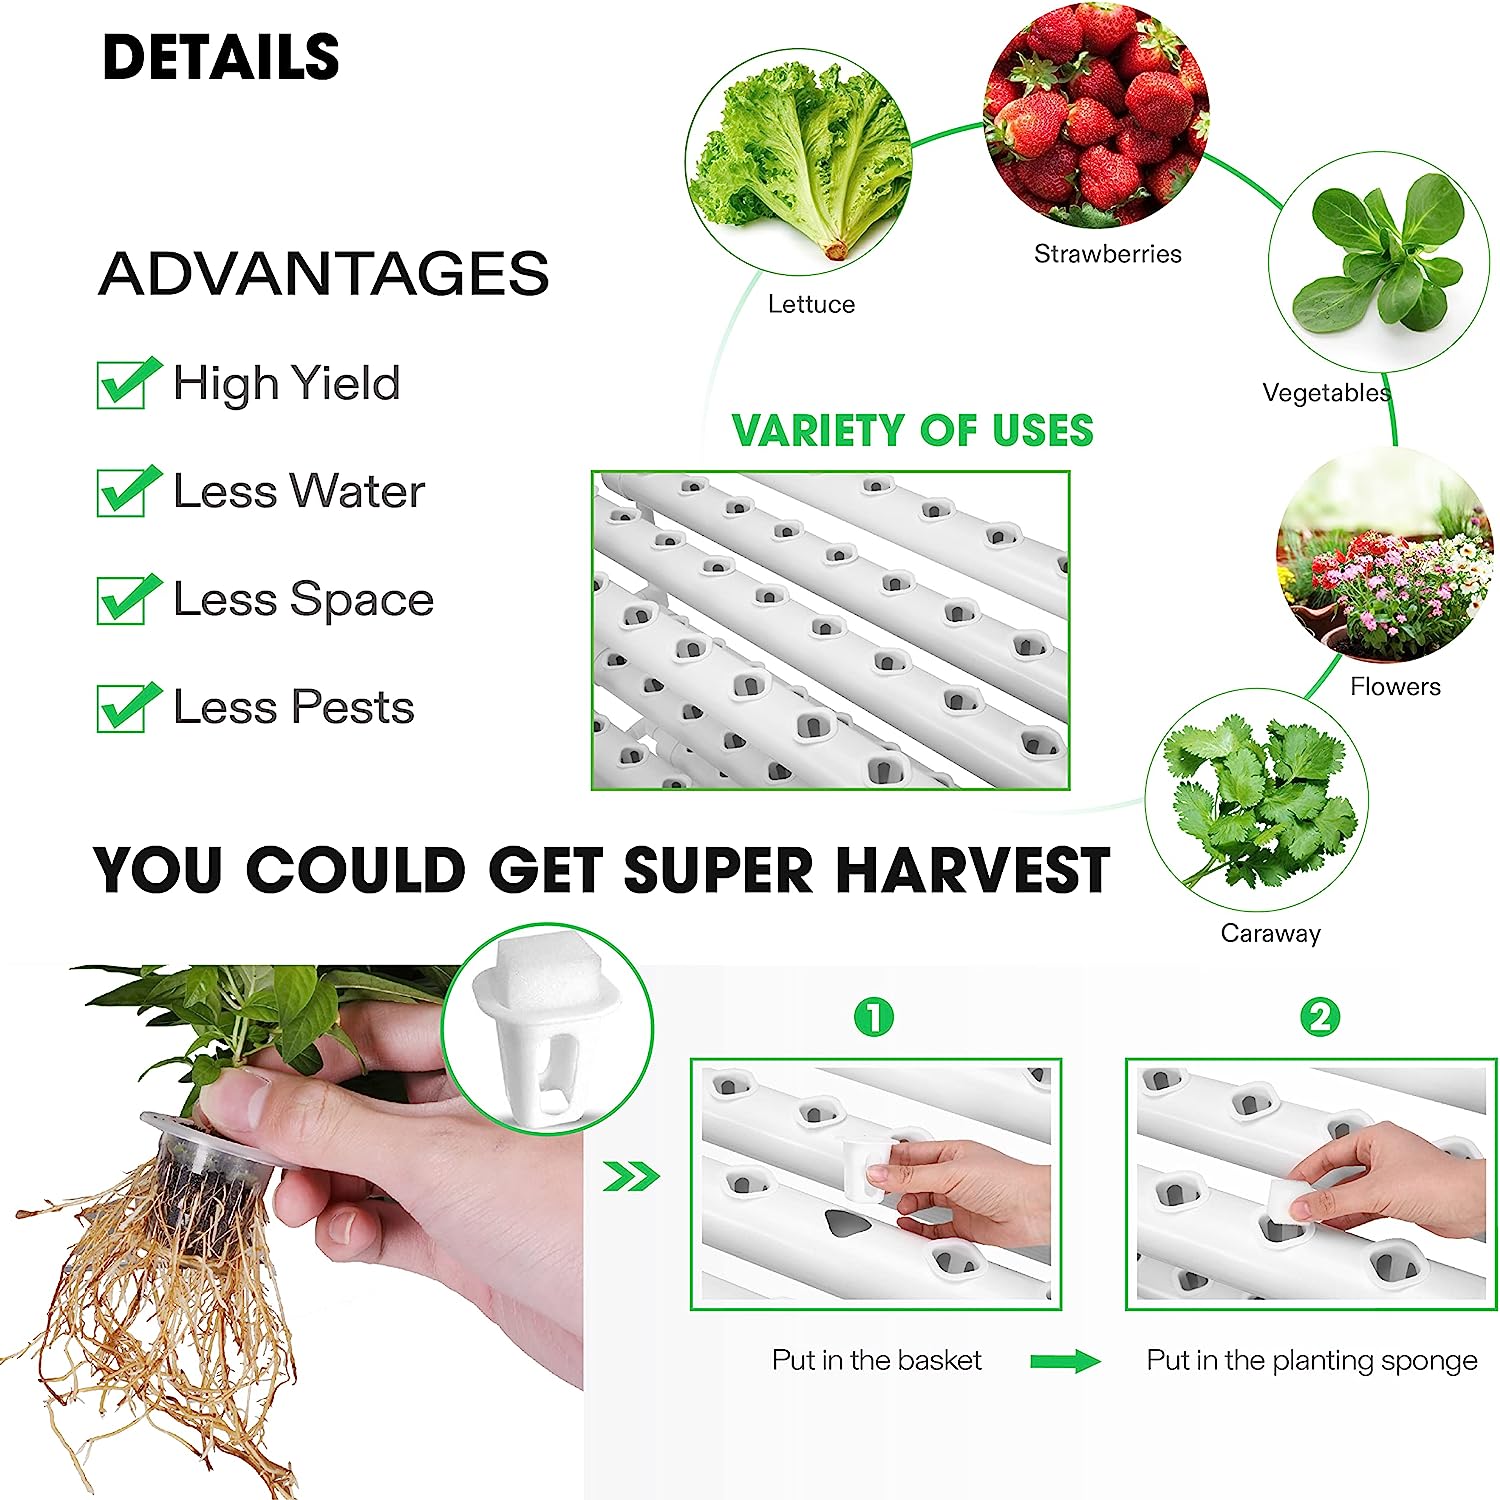 Hydroponics Growing System 108 Plant Sites, 3 Layers 12 Food-Grade PVC-U Pipes Gardening System Grow Kit with Water Pump Timer, Nest Basket and Sponge for Leafy Vegetables